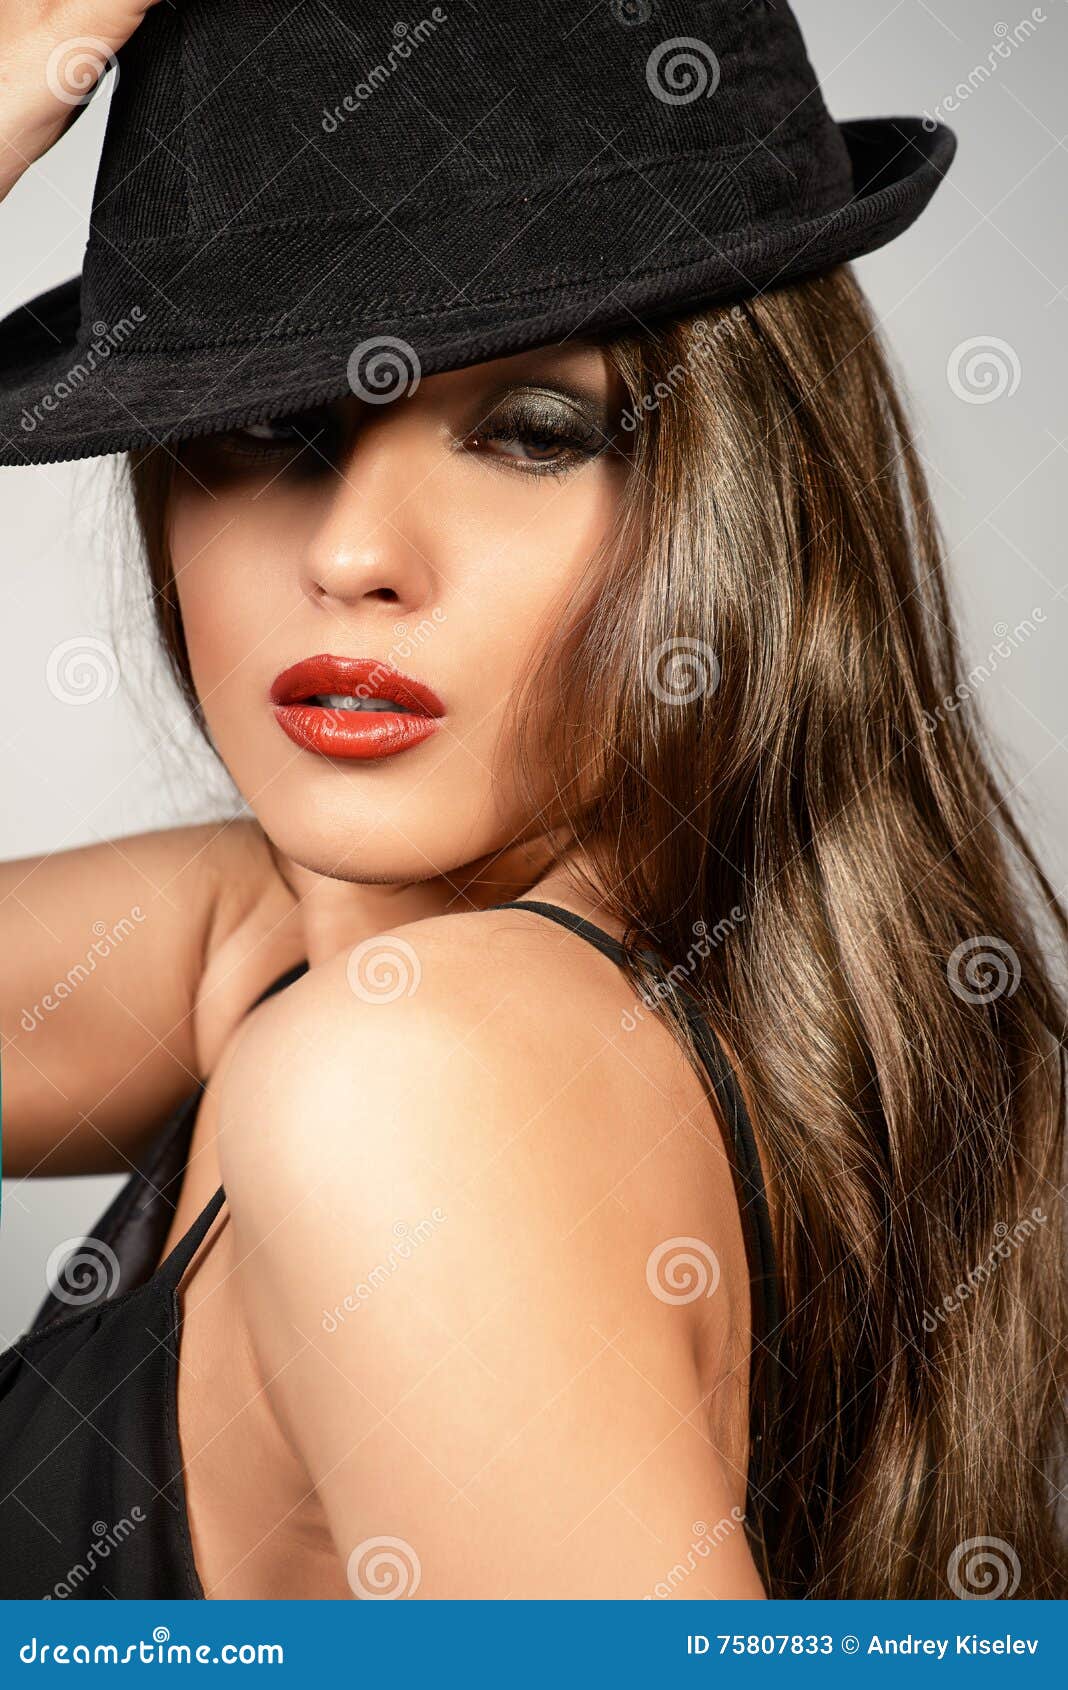 Sex Appeal Stock Image Image Of Beauty Caucasian Lips 75807833